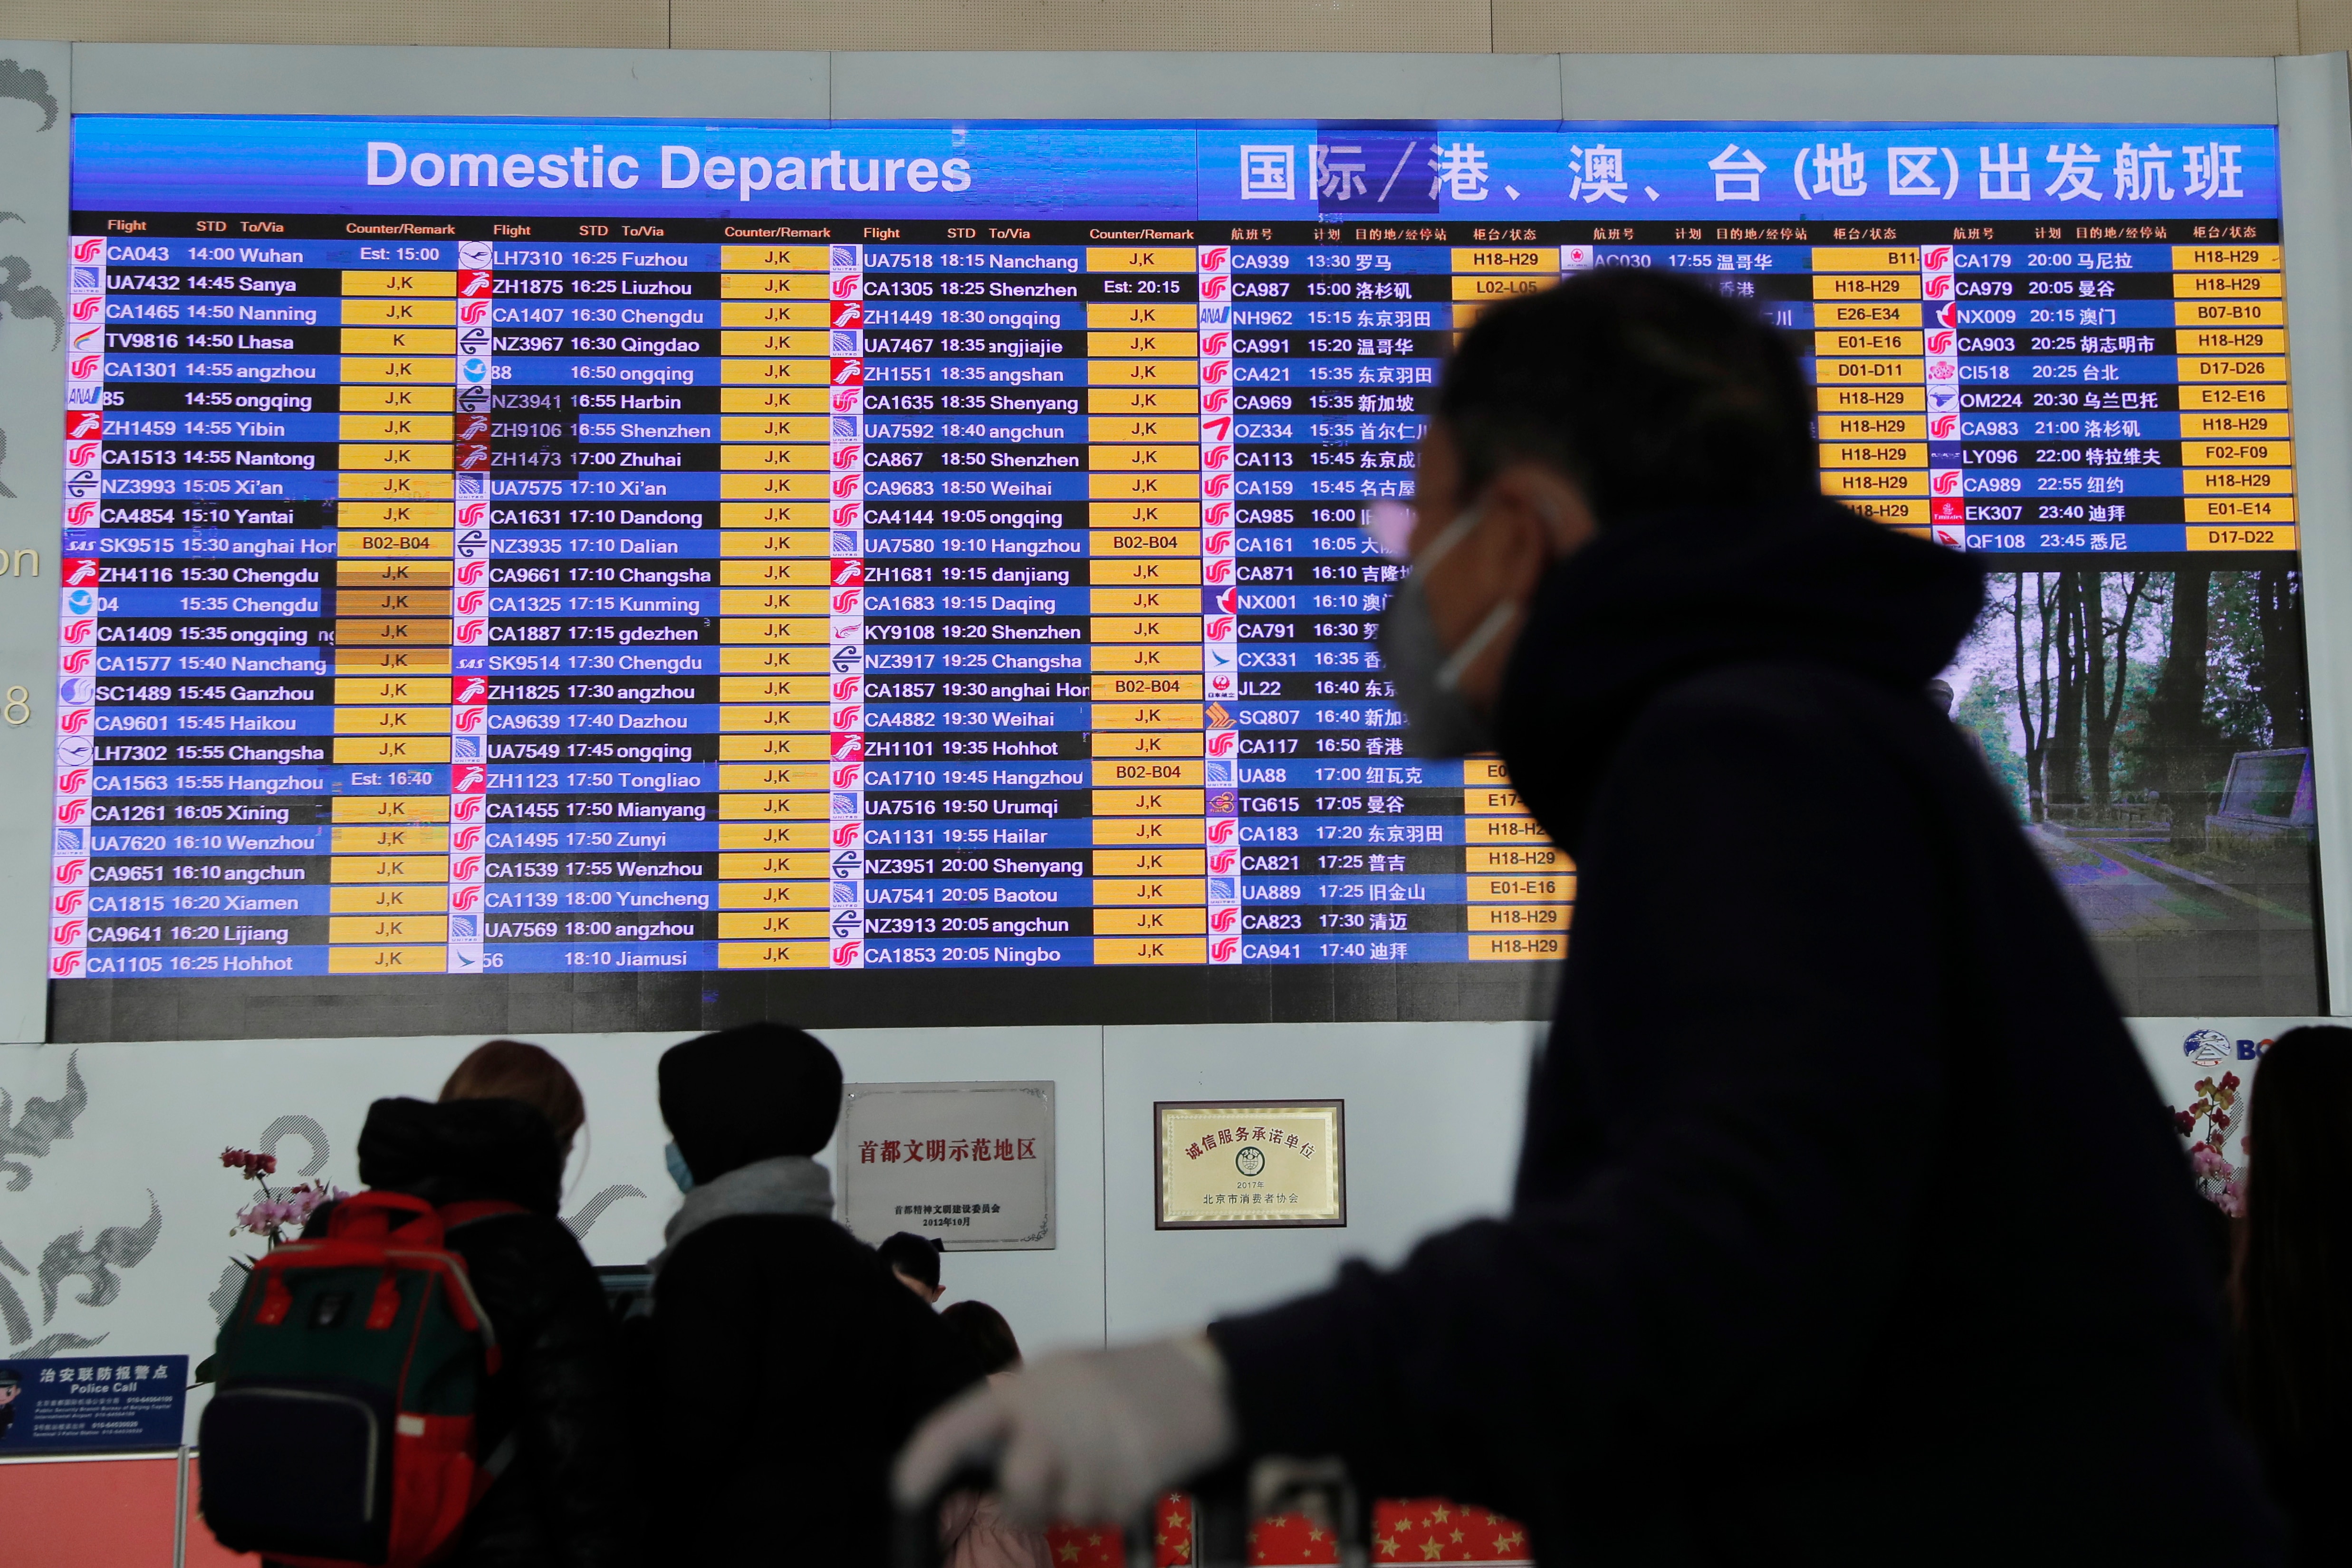 A passenger wears a mask passing by a departure information screen at Beijing Capital International Airport